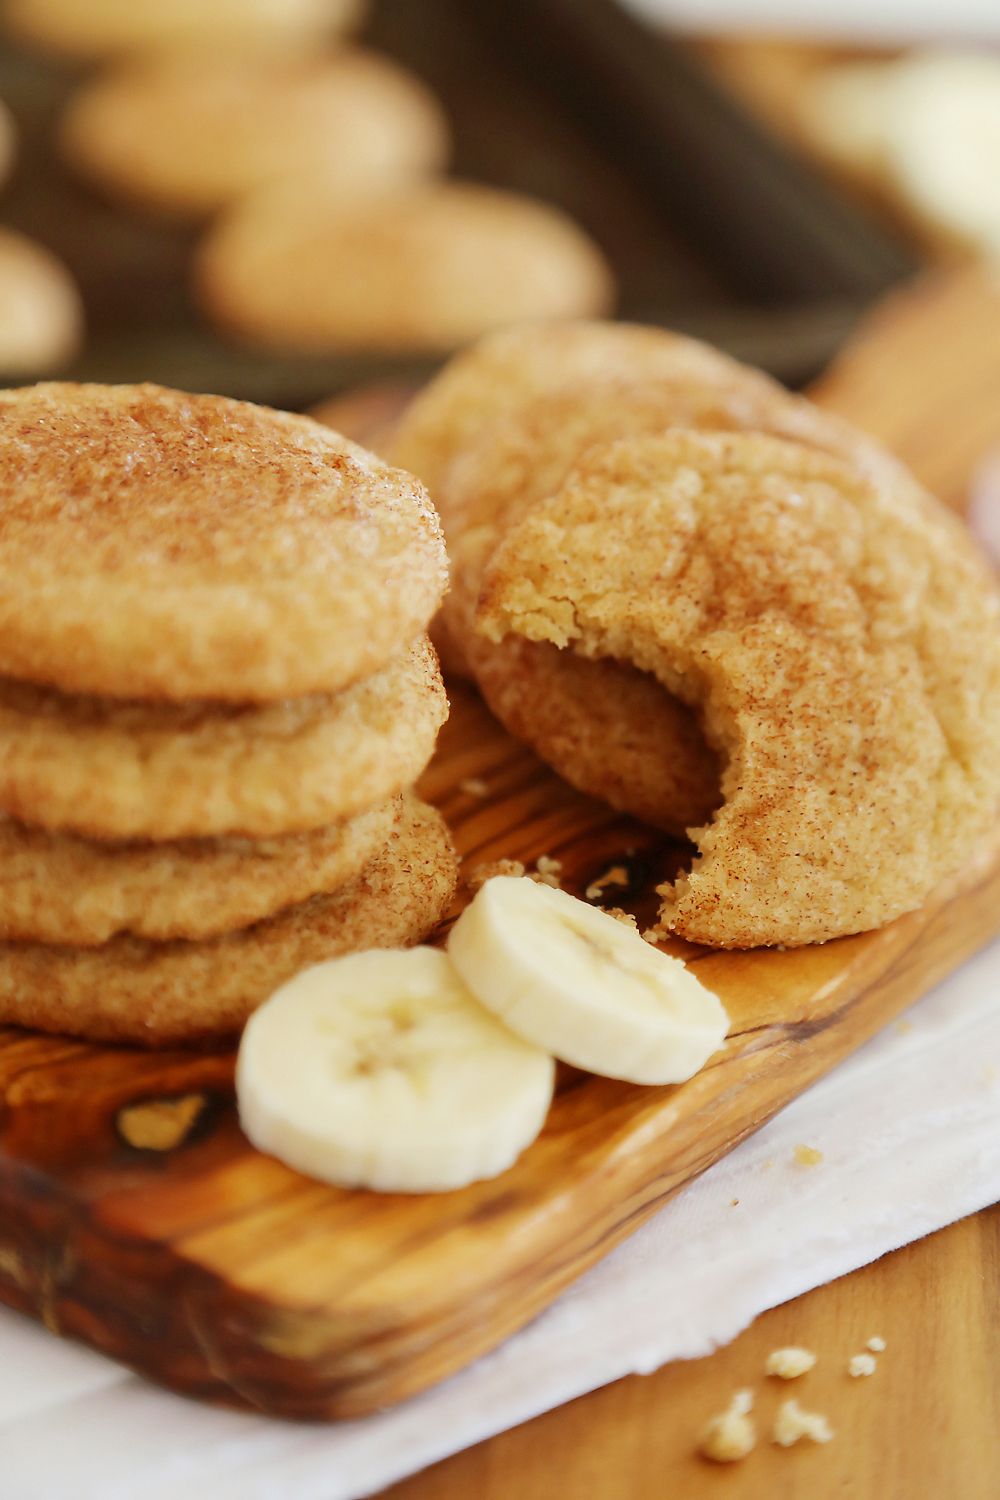 Banana Snickerdoodles – Leftover bananas? Bake these super soft, chewy cinnamon spiced snickerdoodles with sweet banana flavor! thecomfortofcooking.com